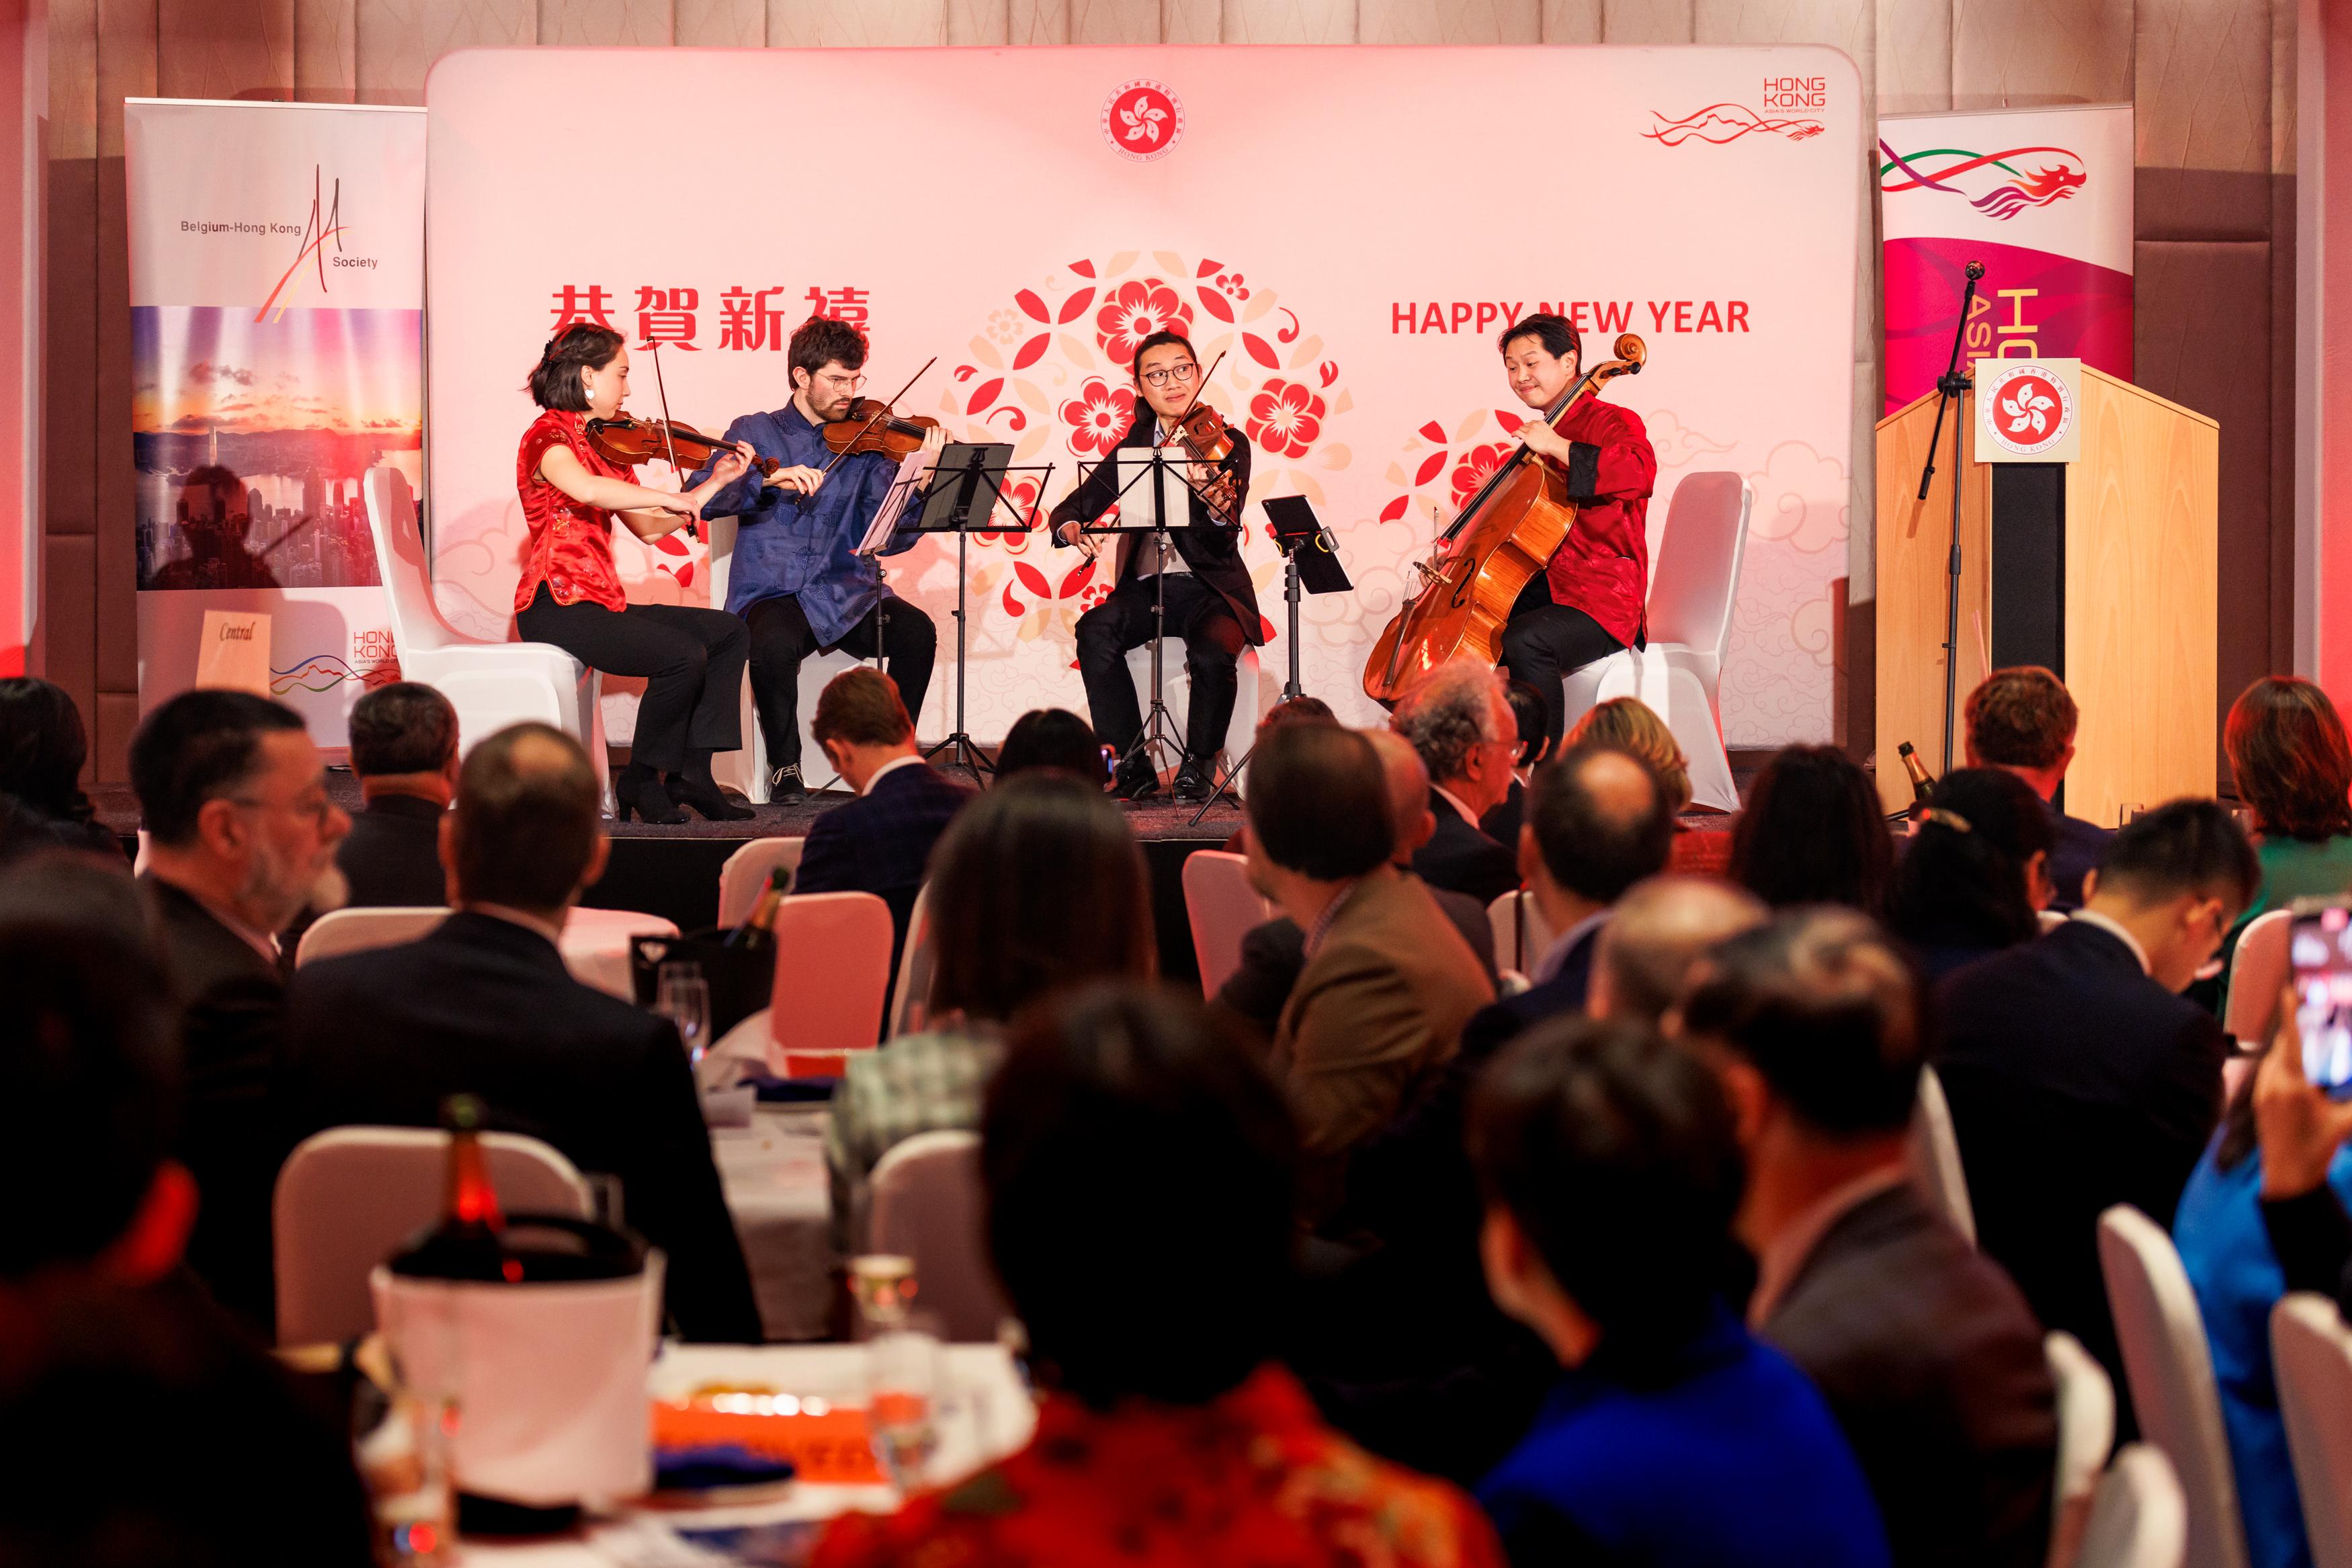 Photo shows a string quartet composed of talented young musicians, invited by HKETO, Brussels, performing for guests at the Chinese New Year reception in Brussels on January 31 (Brussels time).